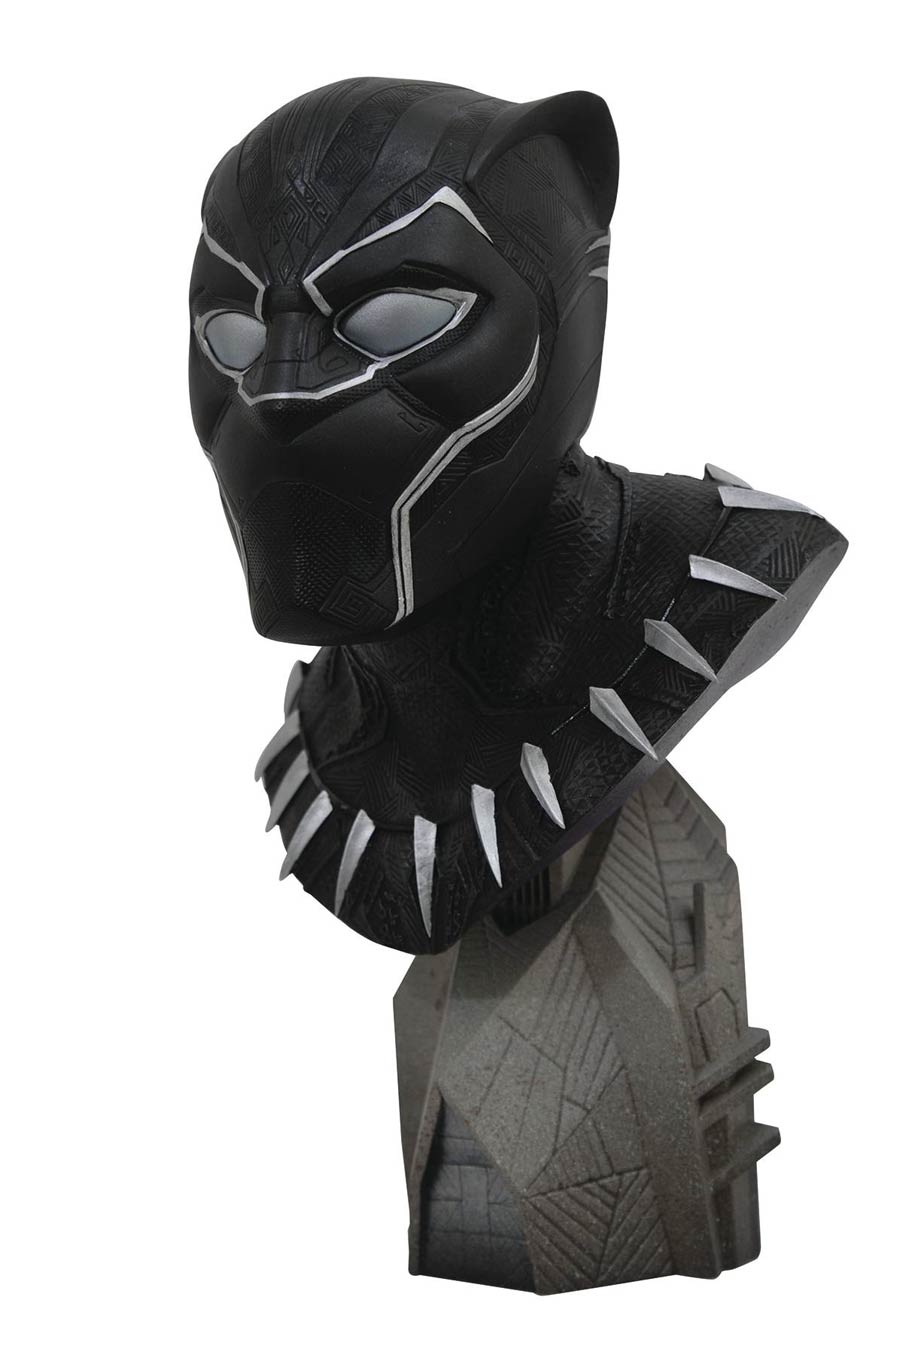 Legends In 3D Movie Black Panther 1/2 Scale Bust